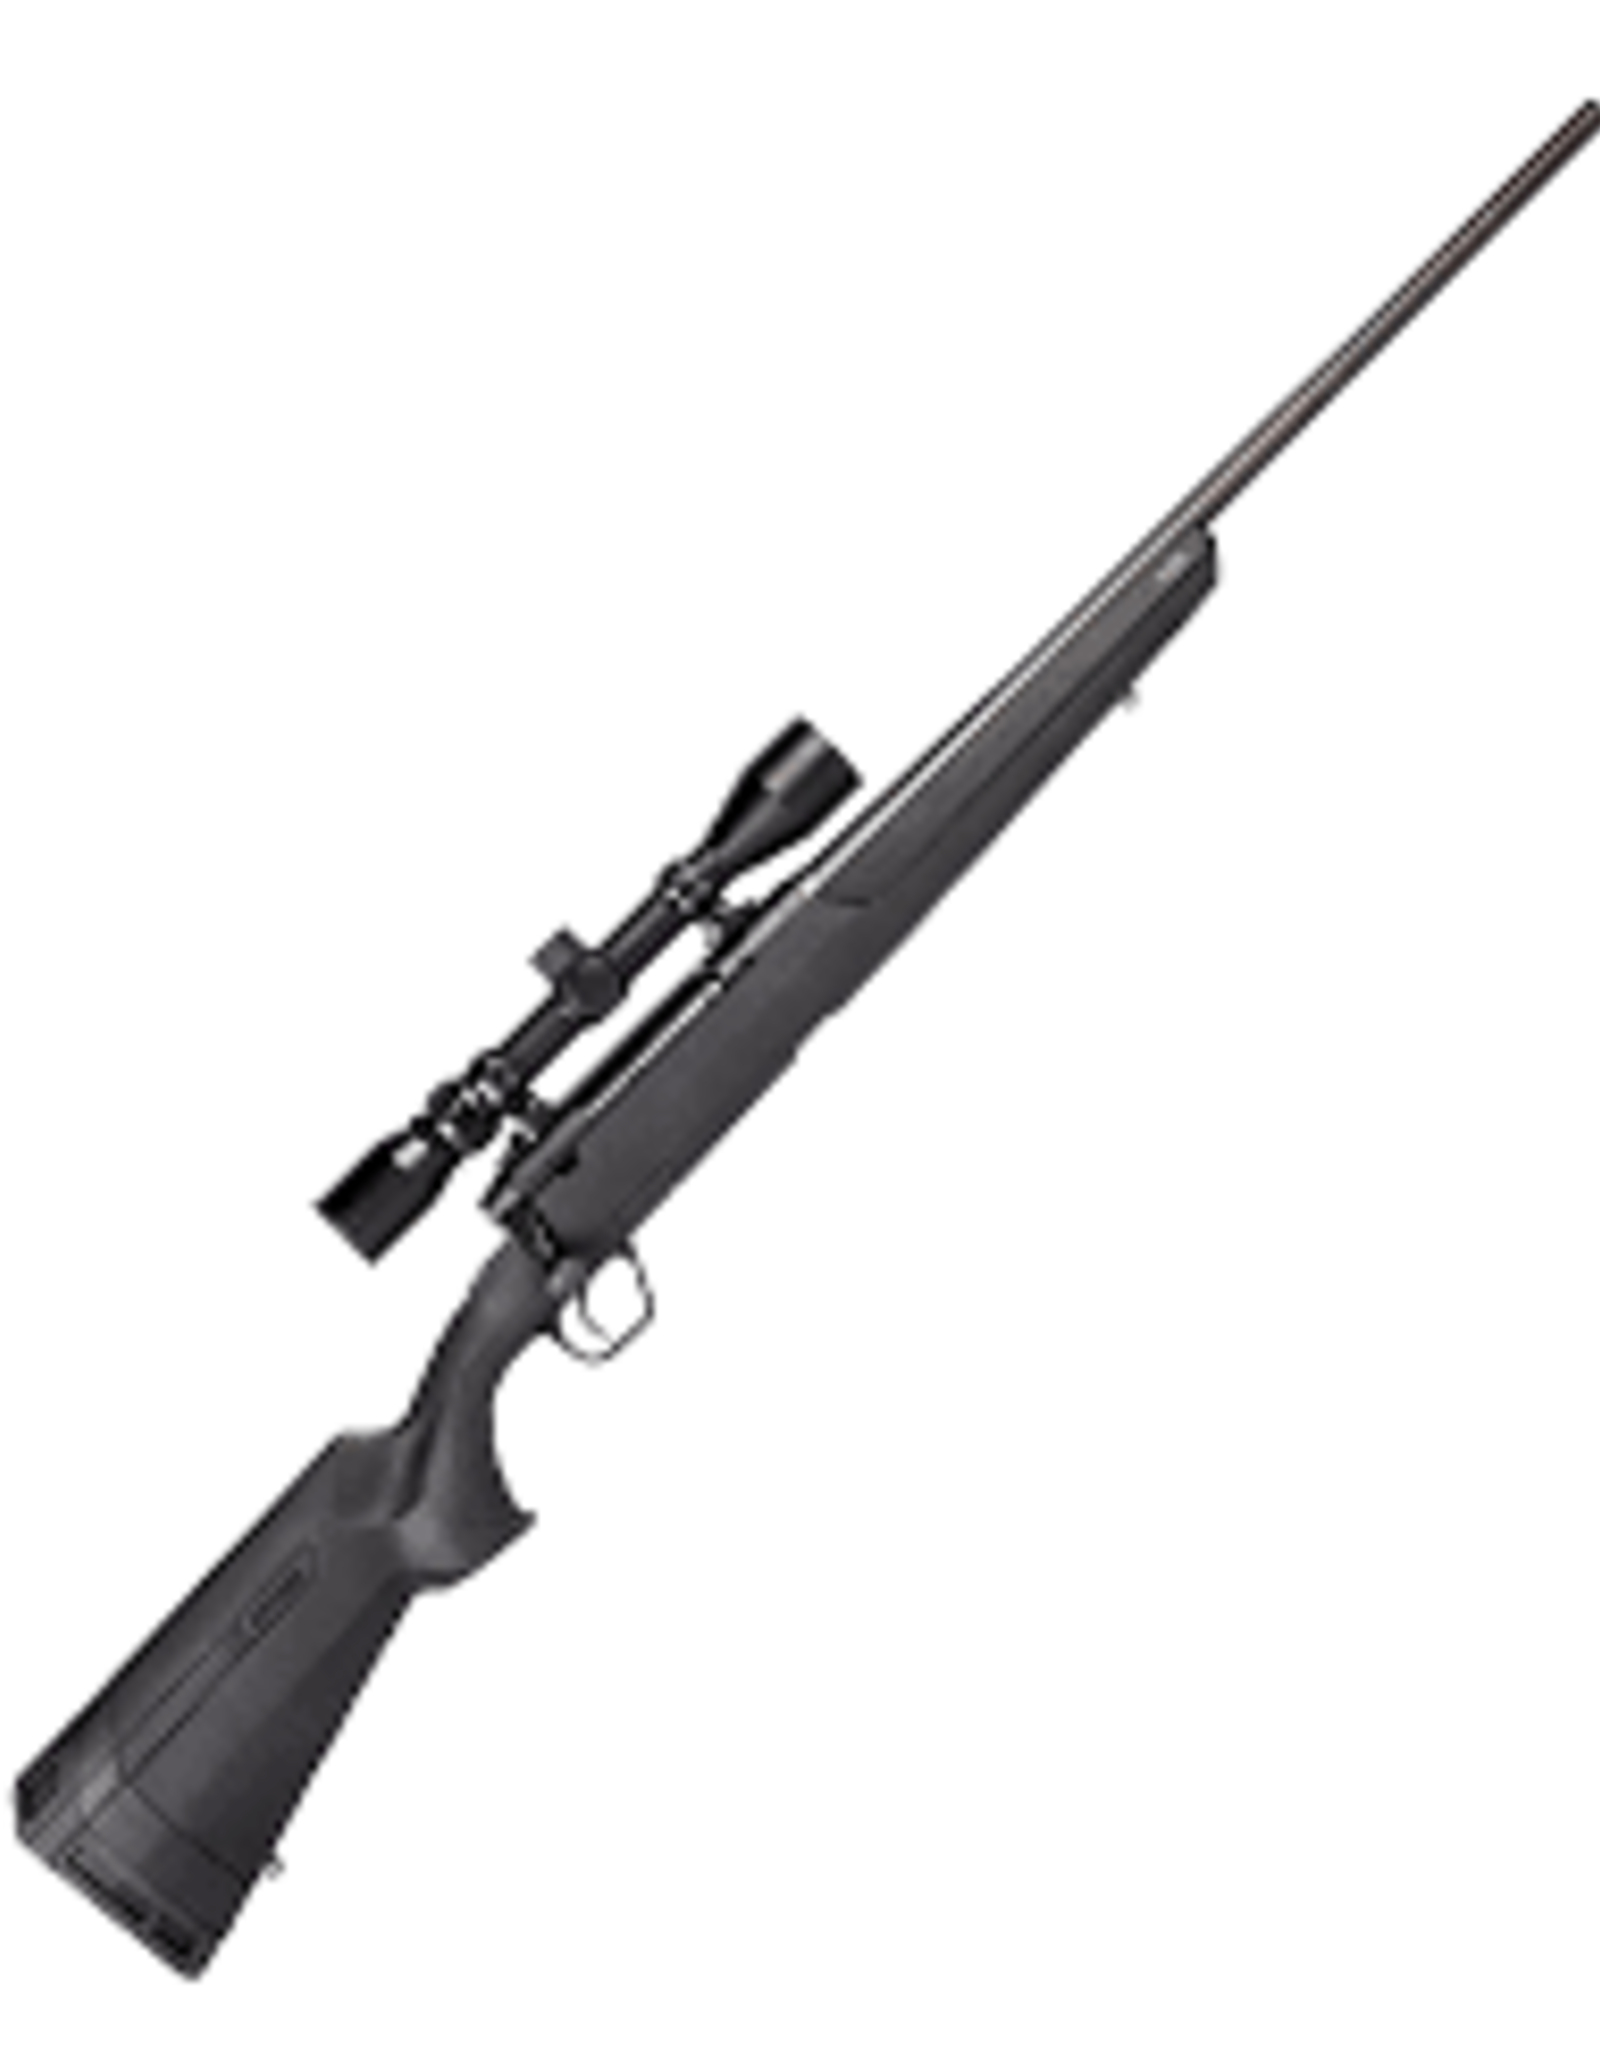 Savage Axis XP Bolt Action Rifle